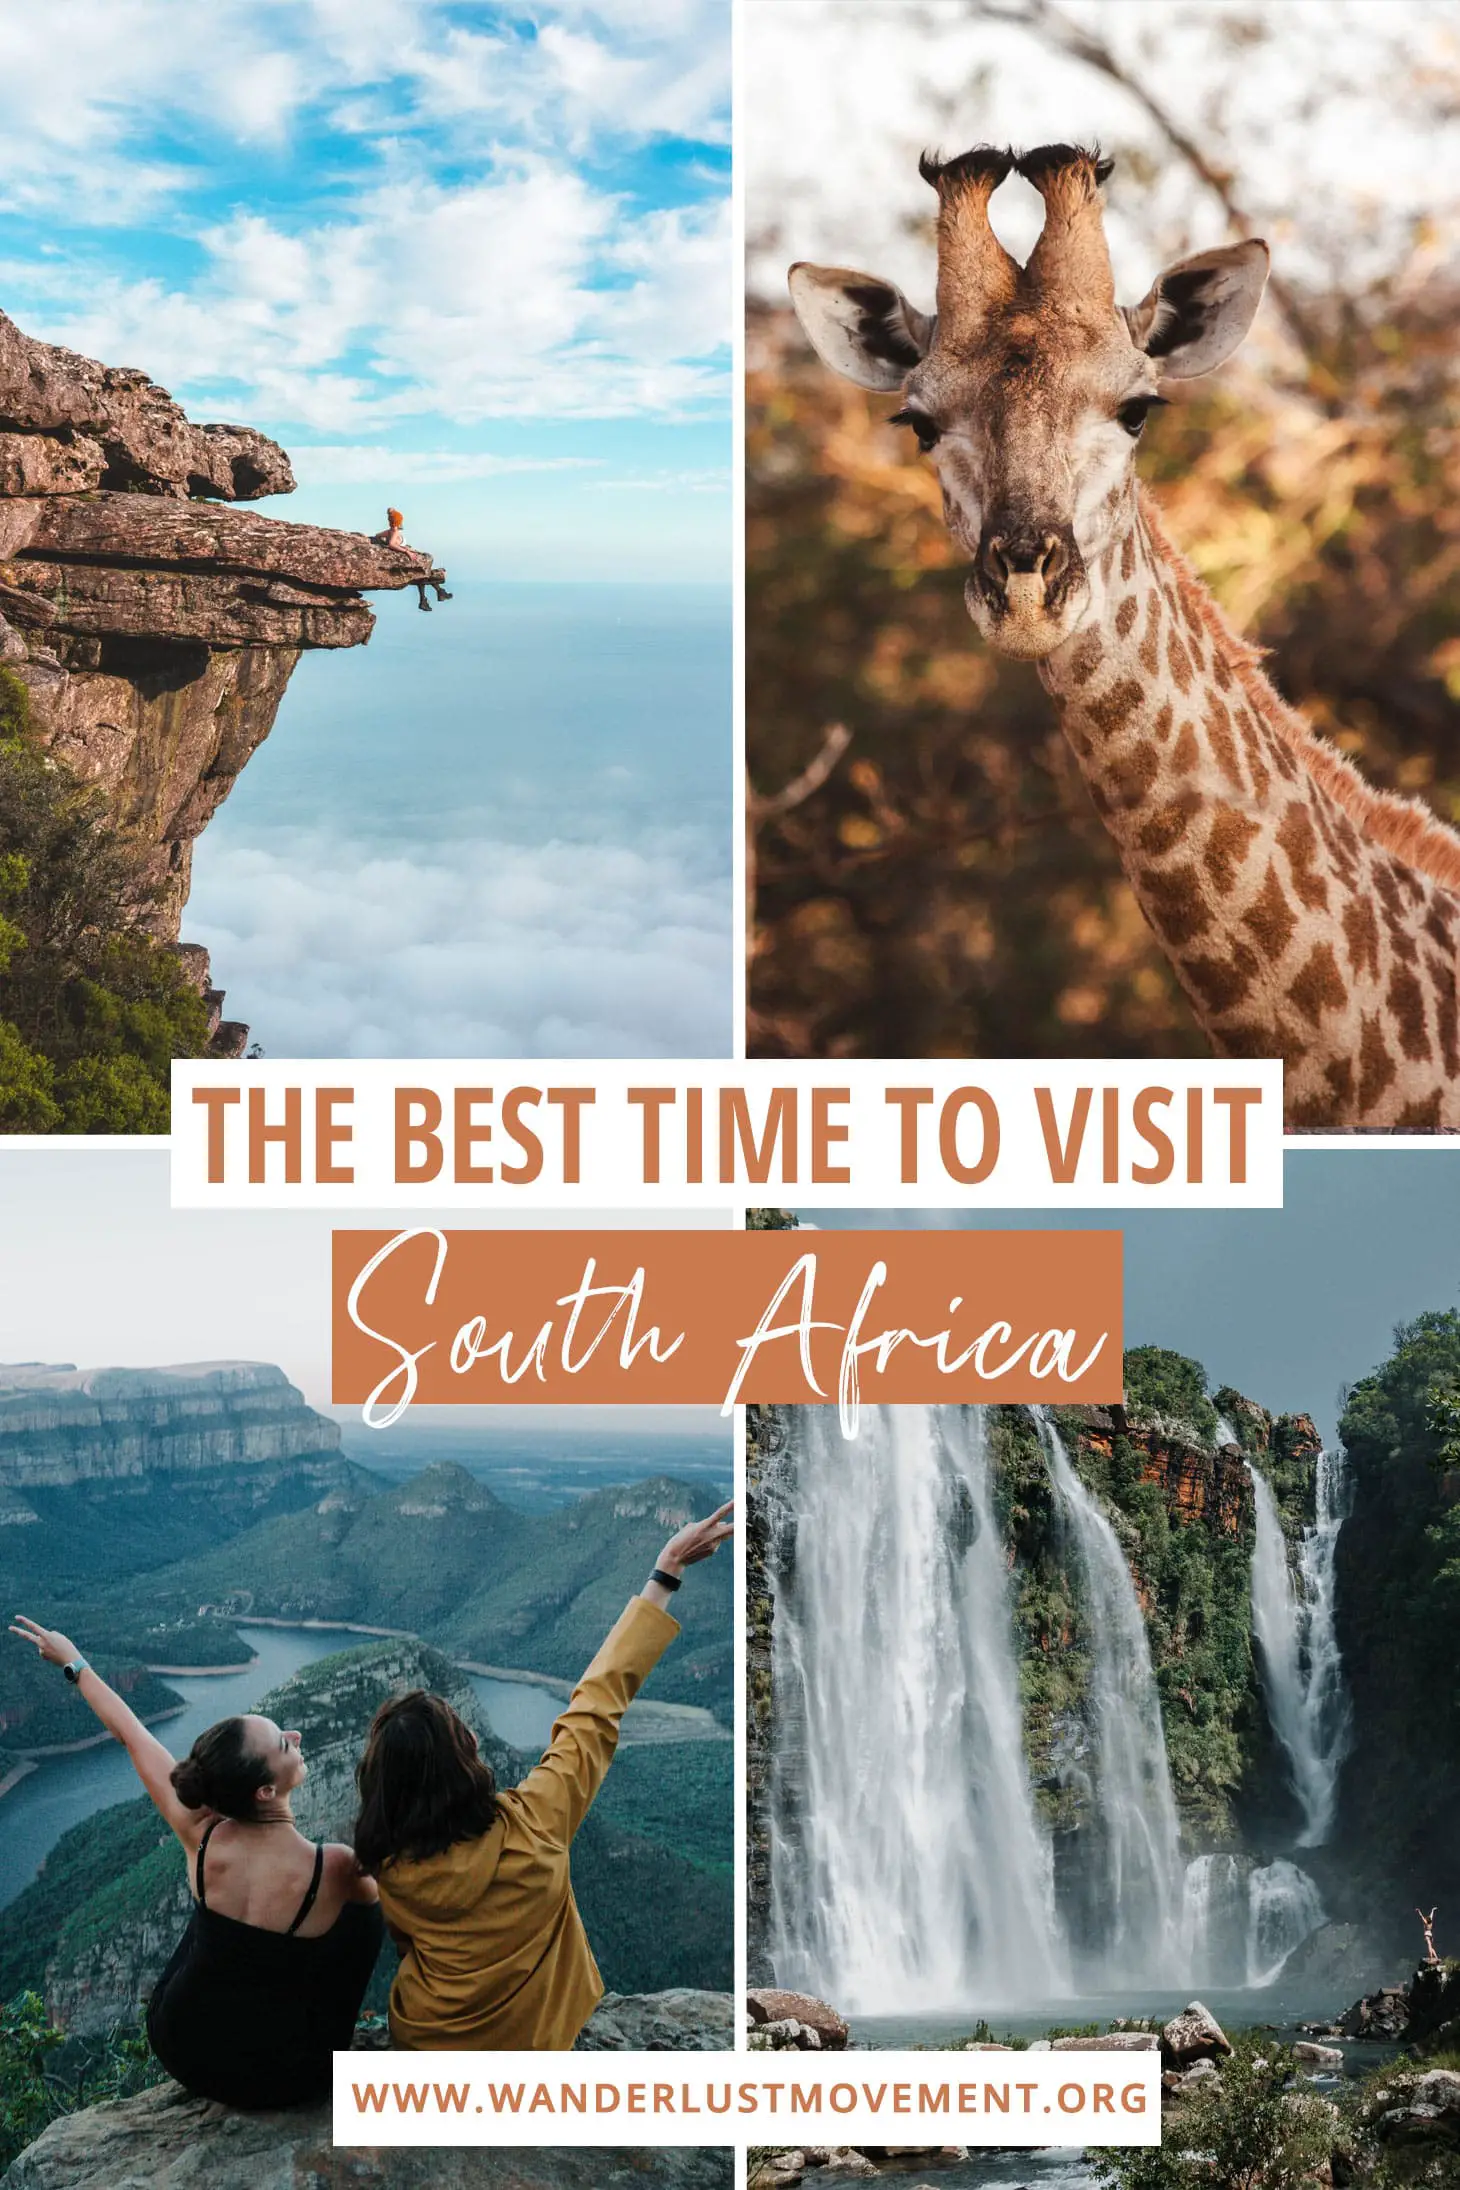 The Best Time to Visit South Africa